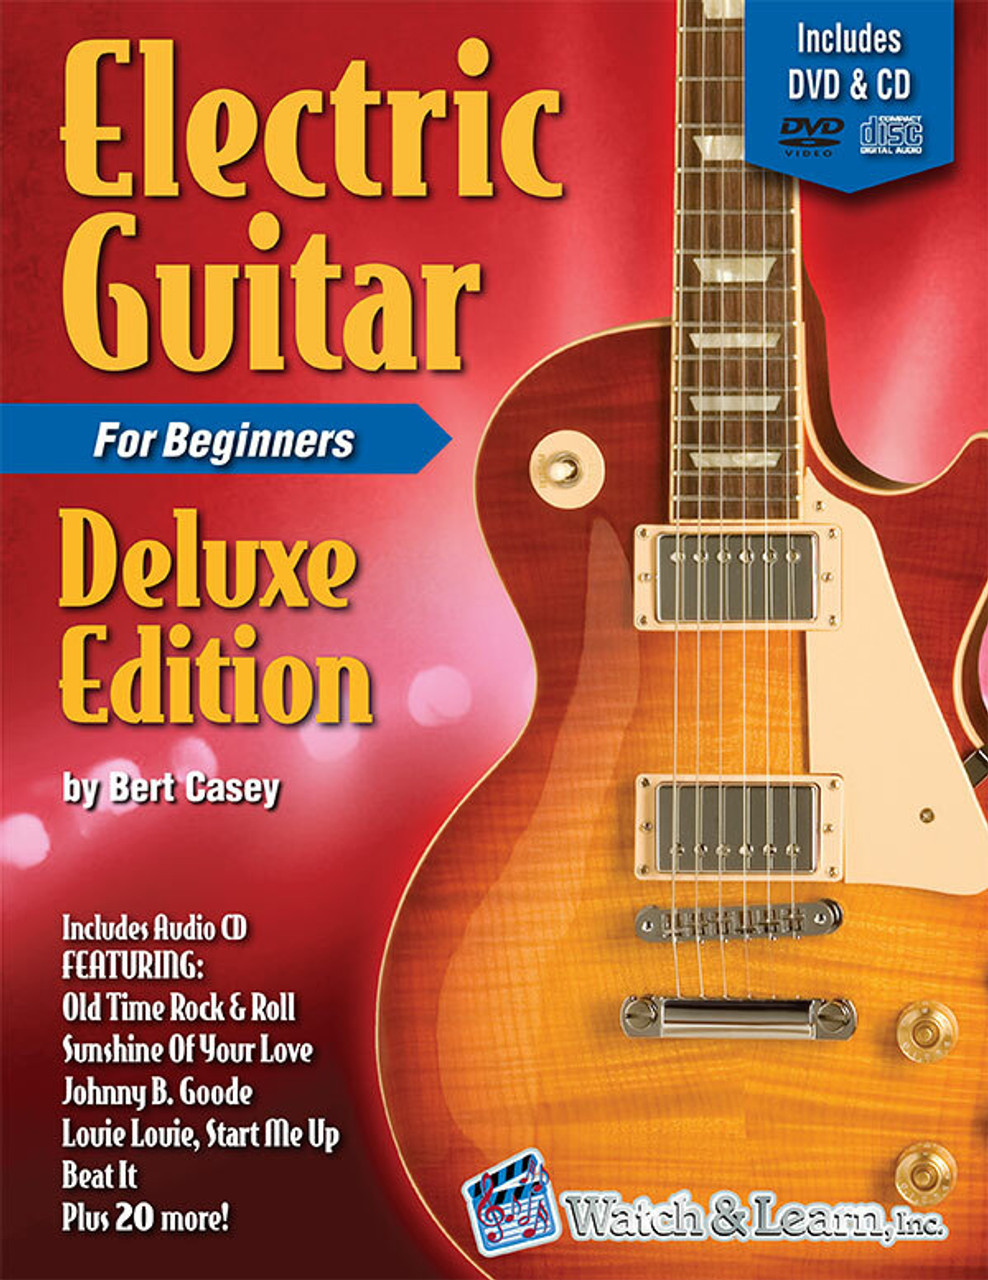 Electric Guitar Deluxe Edition - Book w/ DVD and CD - Bill's Music